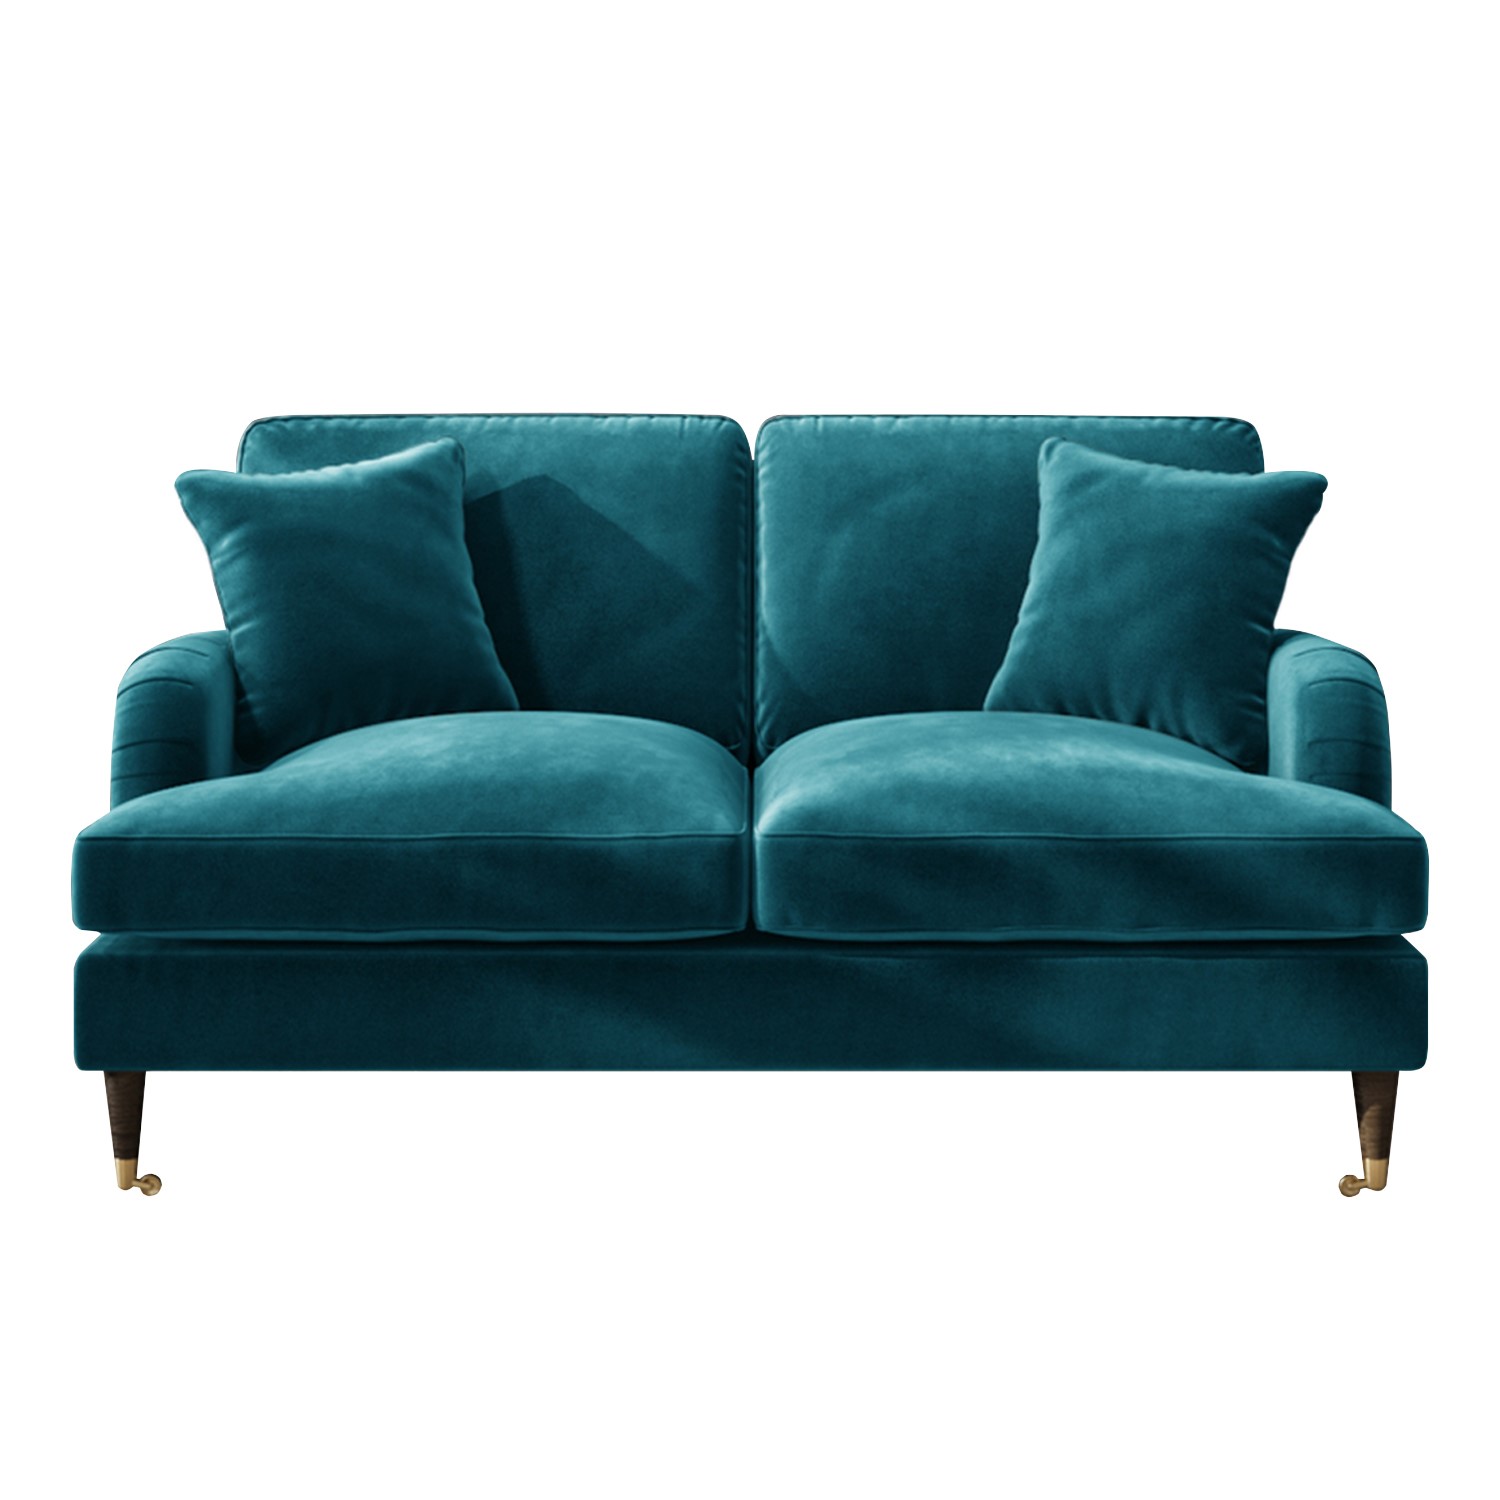 Read more about Teal velvet 2 seater sofa payton